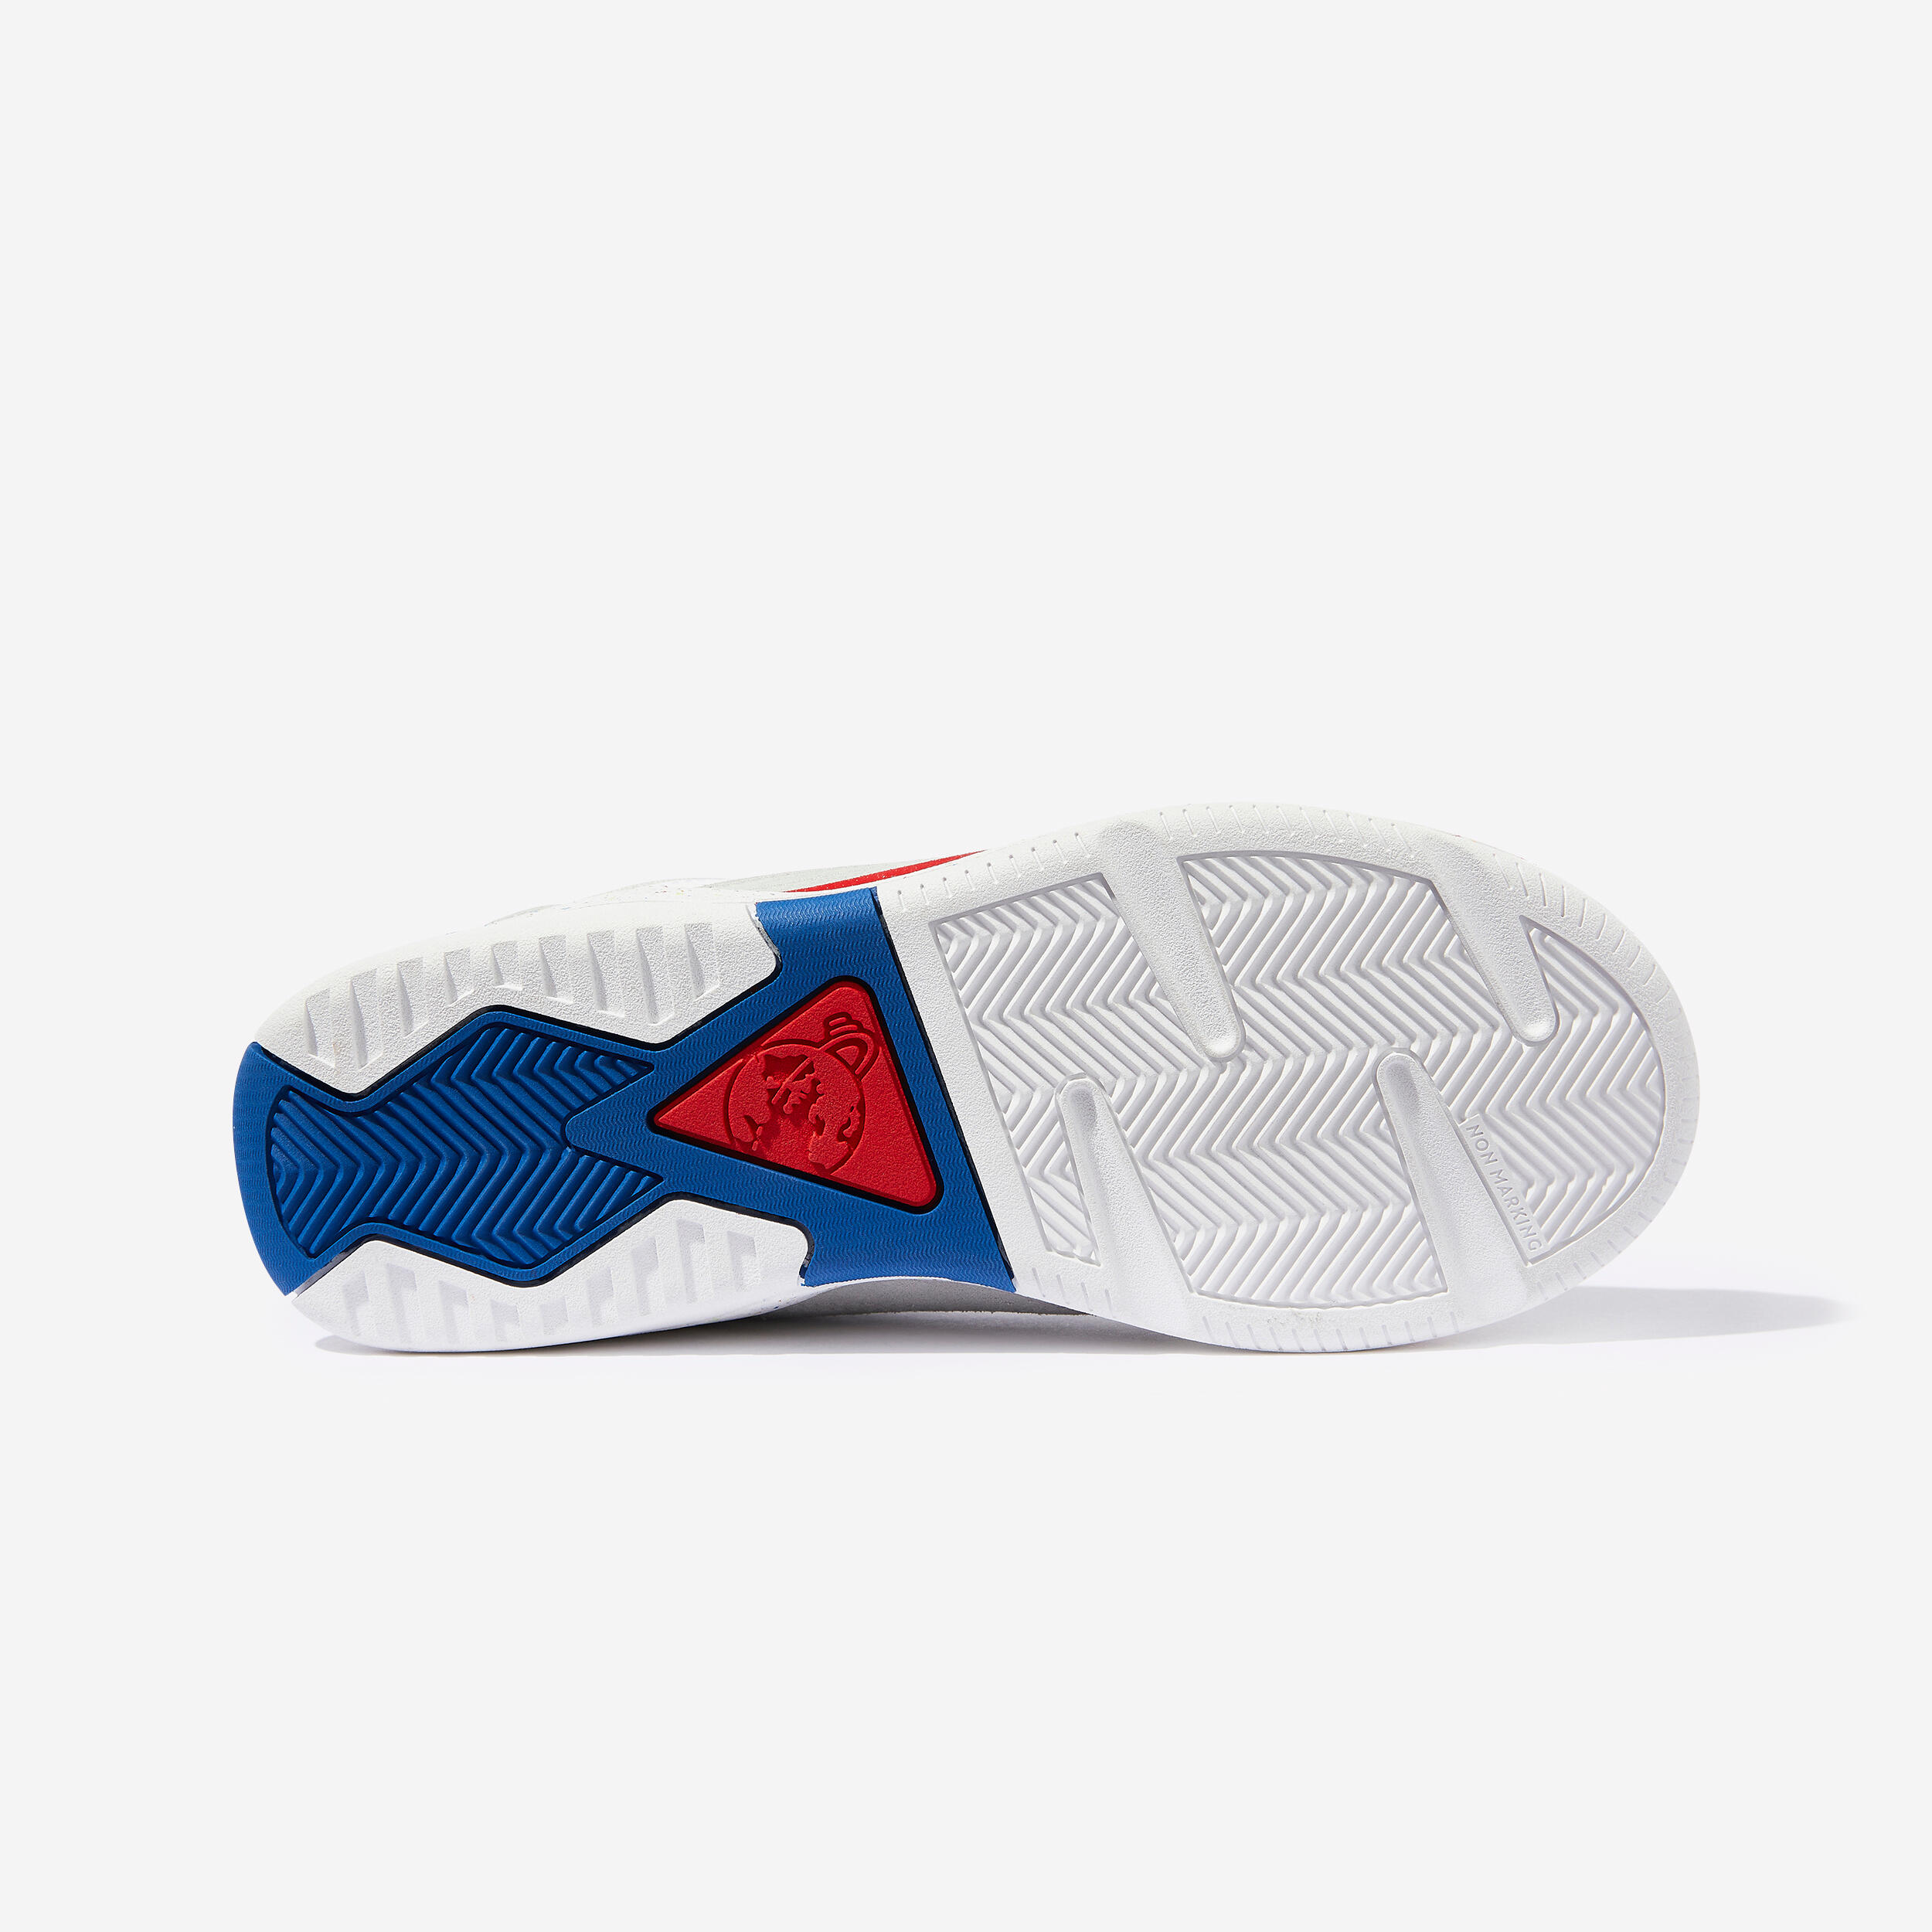 Kids' Lace-Up Shoes Playventure City - White/Blue/Red 3/10